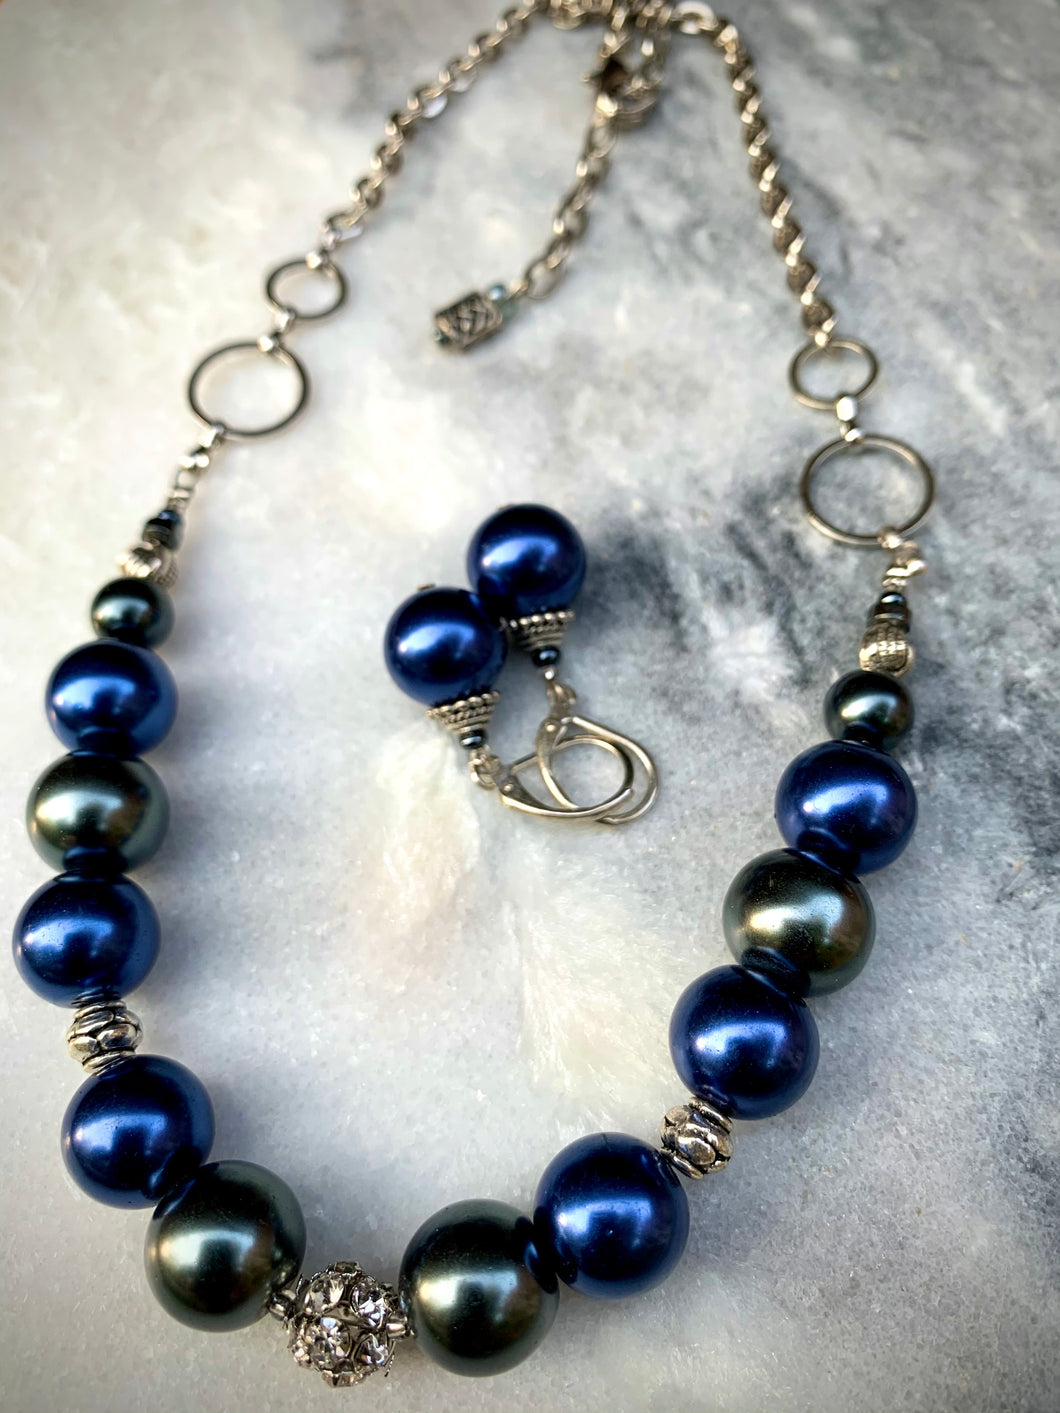 Cobalt Blue and Gray Ball, Crystal, Chain Necklace and Blue Earrings